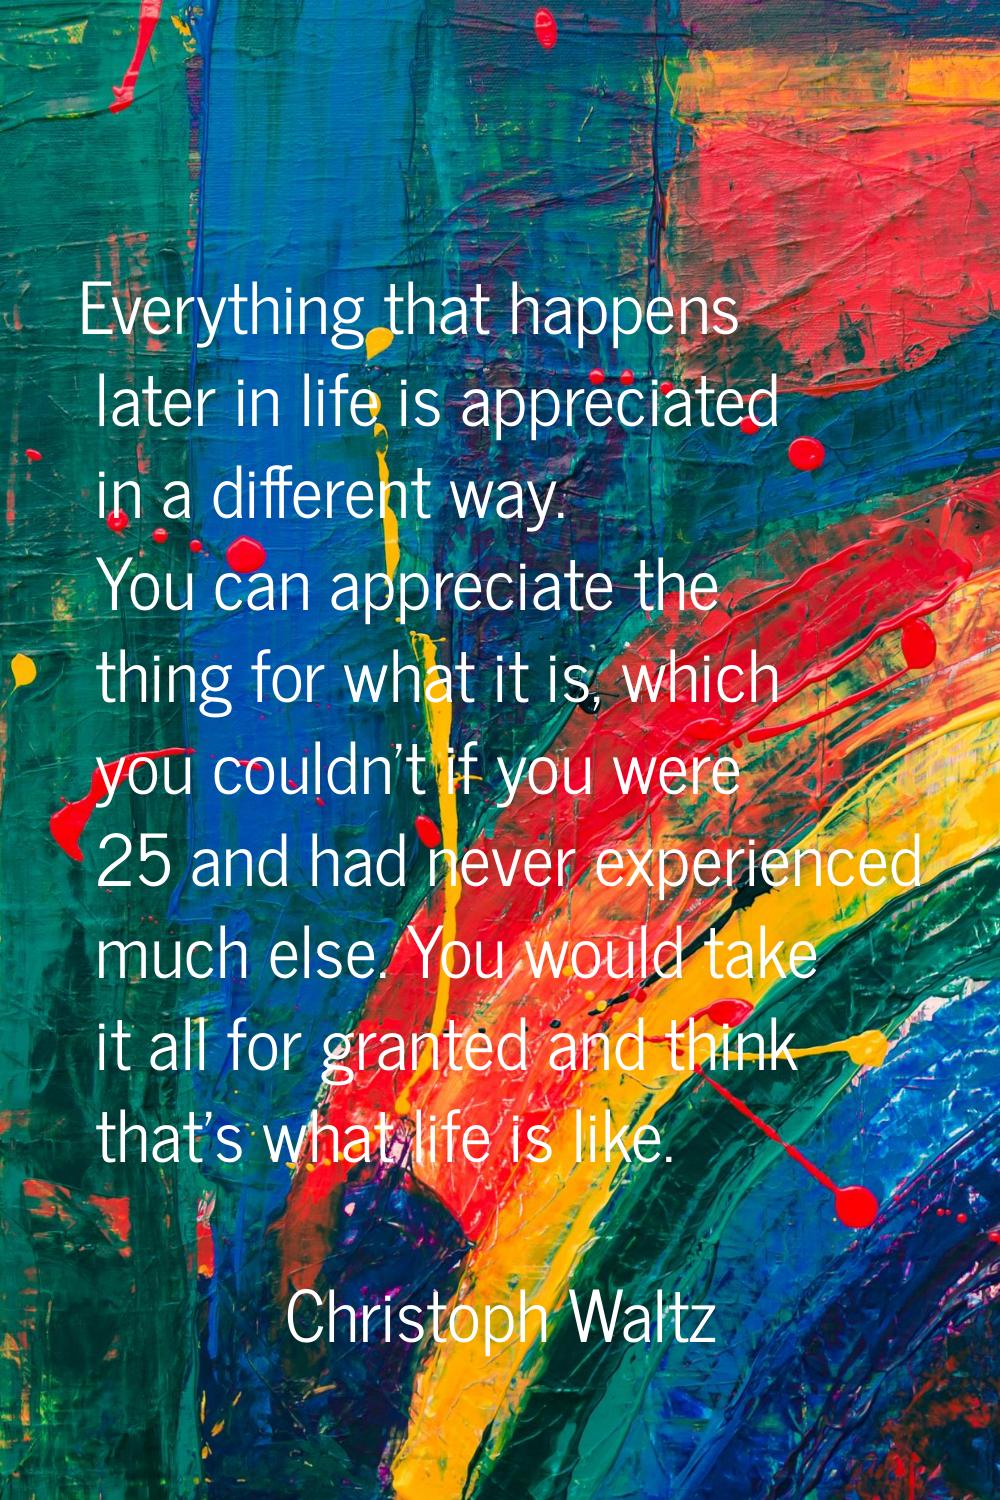 Everything that happens later in life is appreciated in a different way. You can appreciate the thi